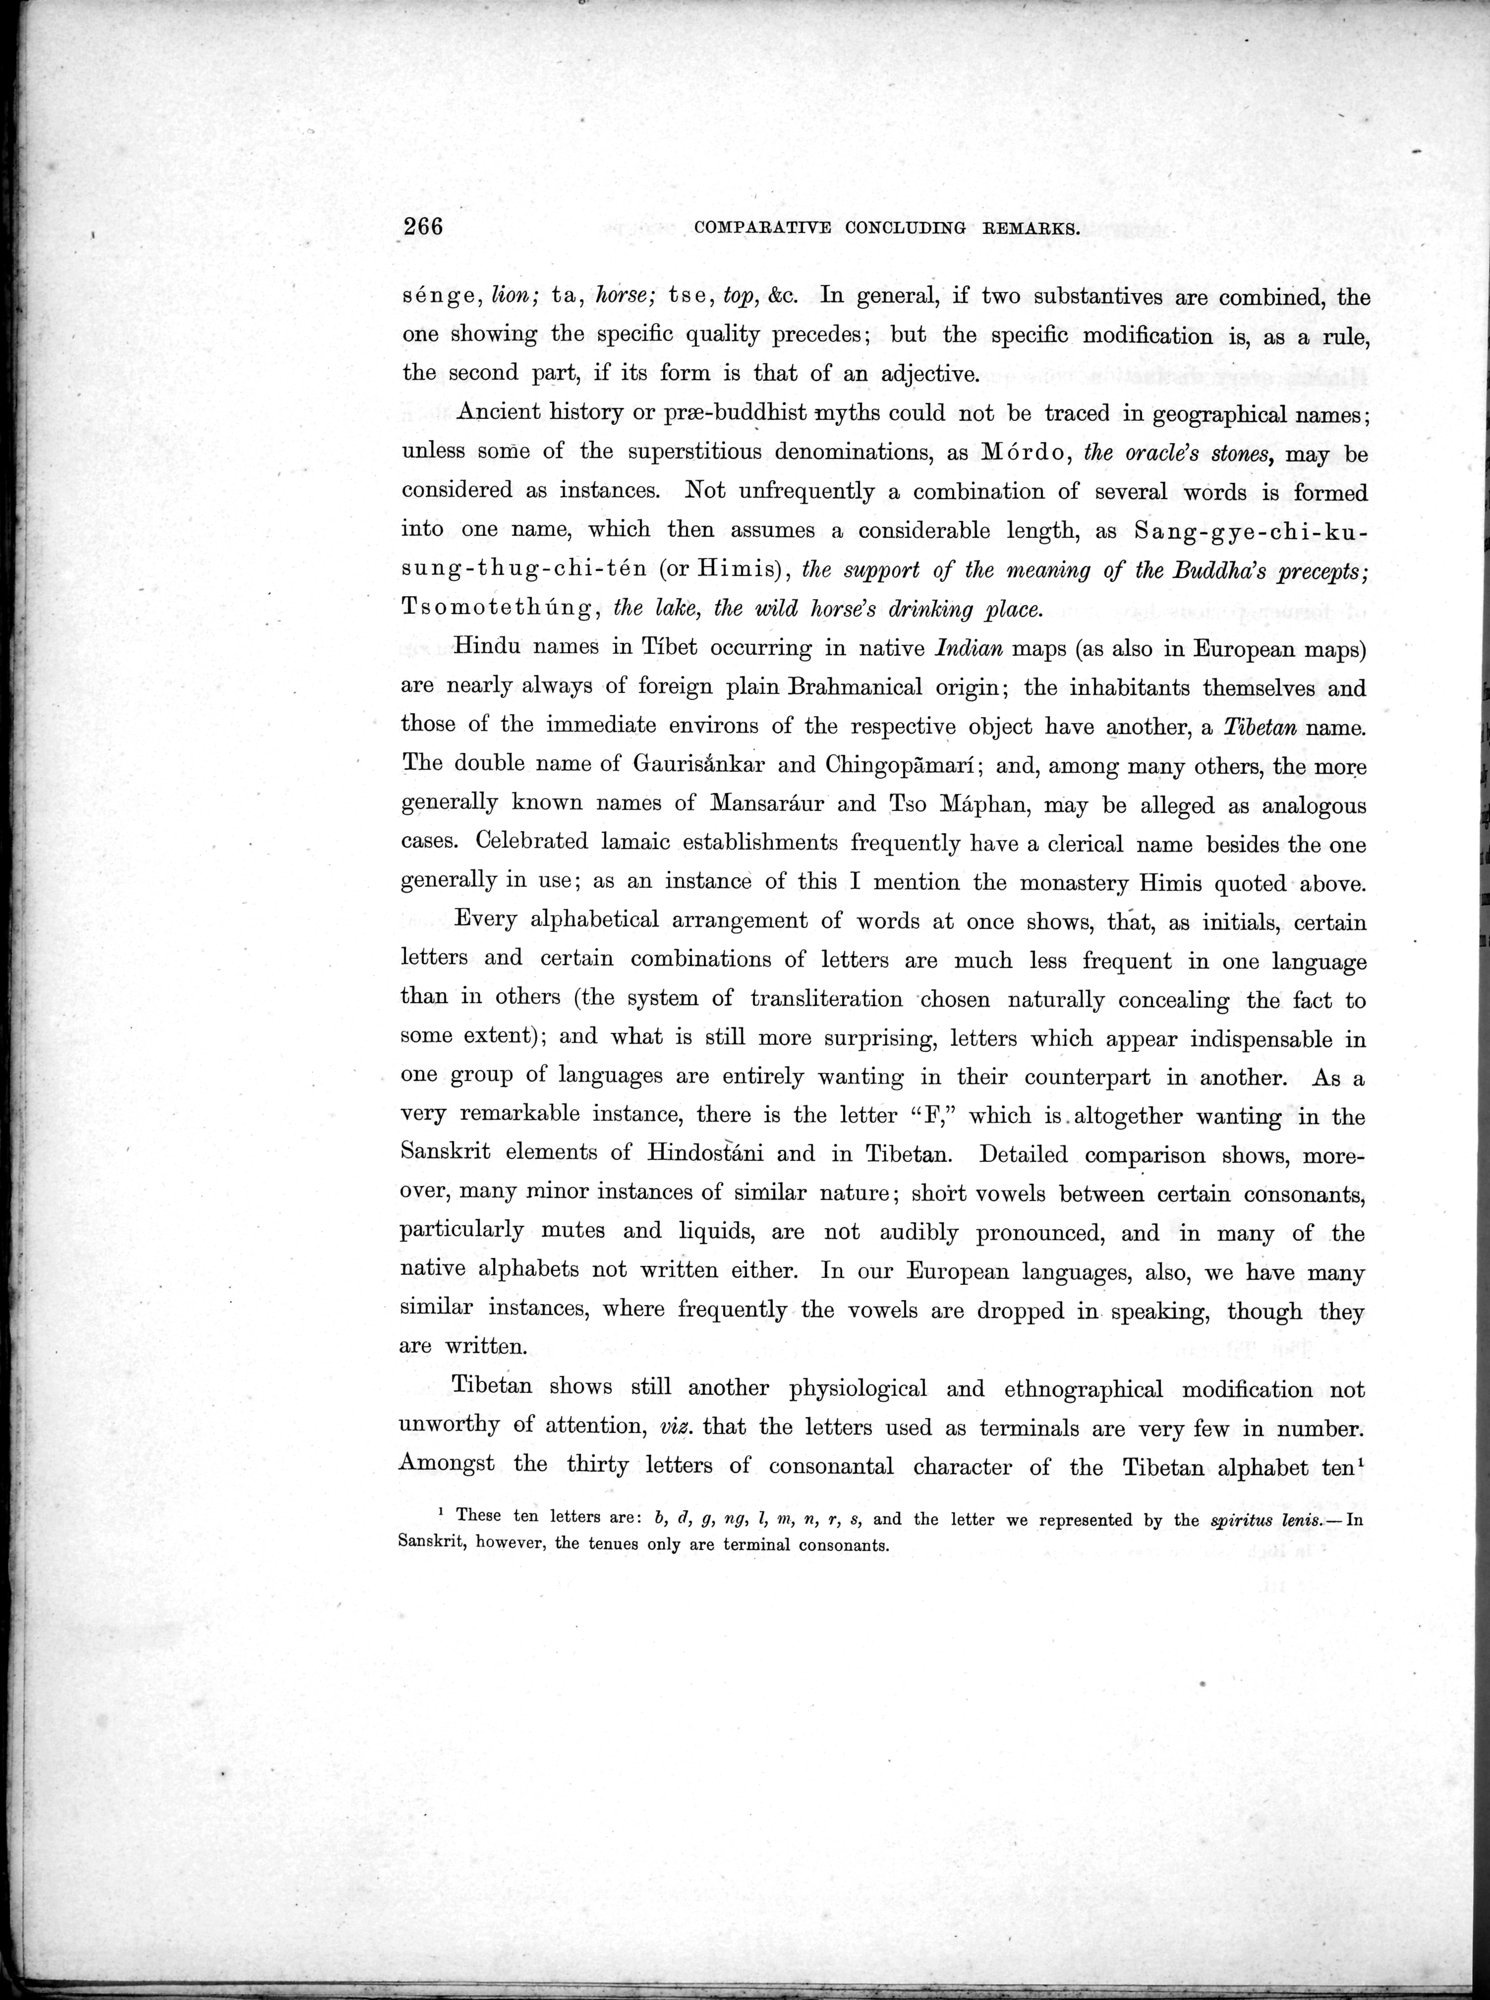 Results of a Scientific Mission to India and High Asia : vol.3 / Page 298 (Grayscale High Resolution Image)